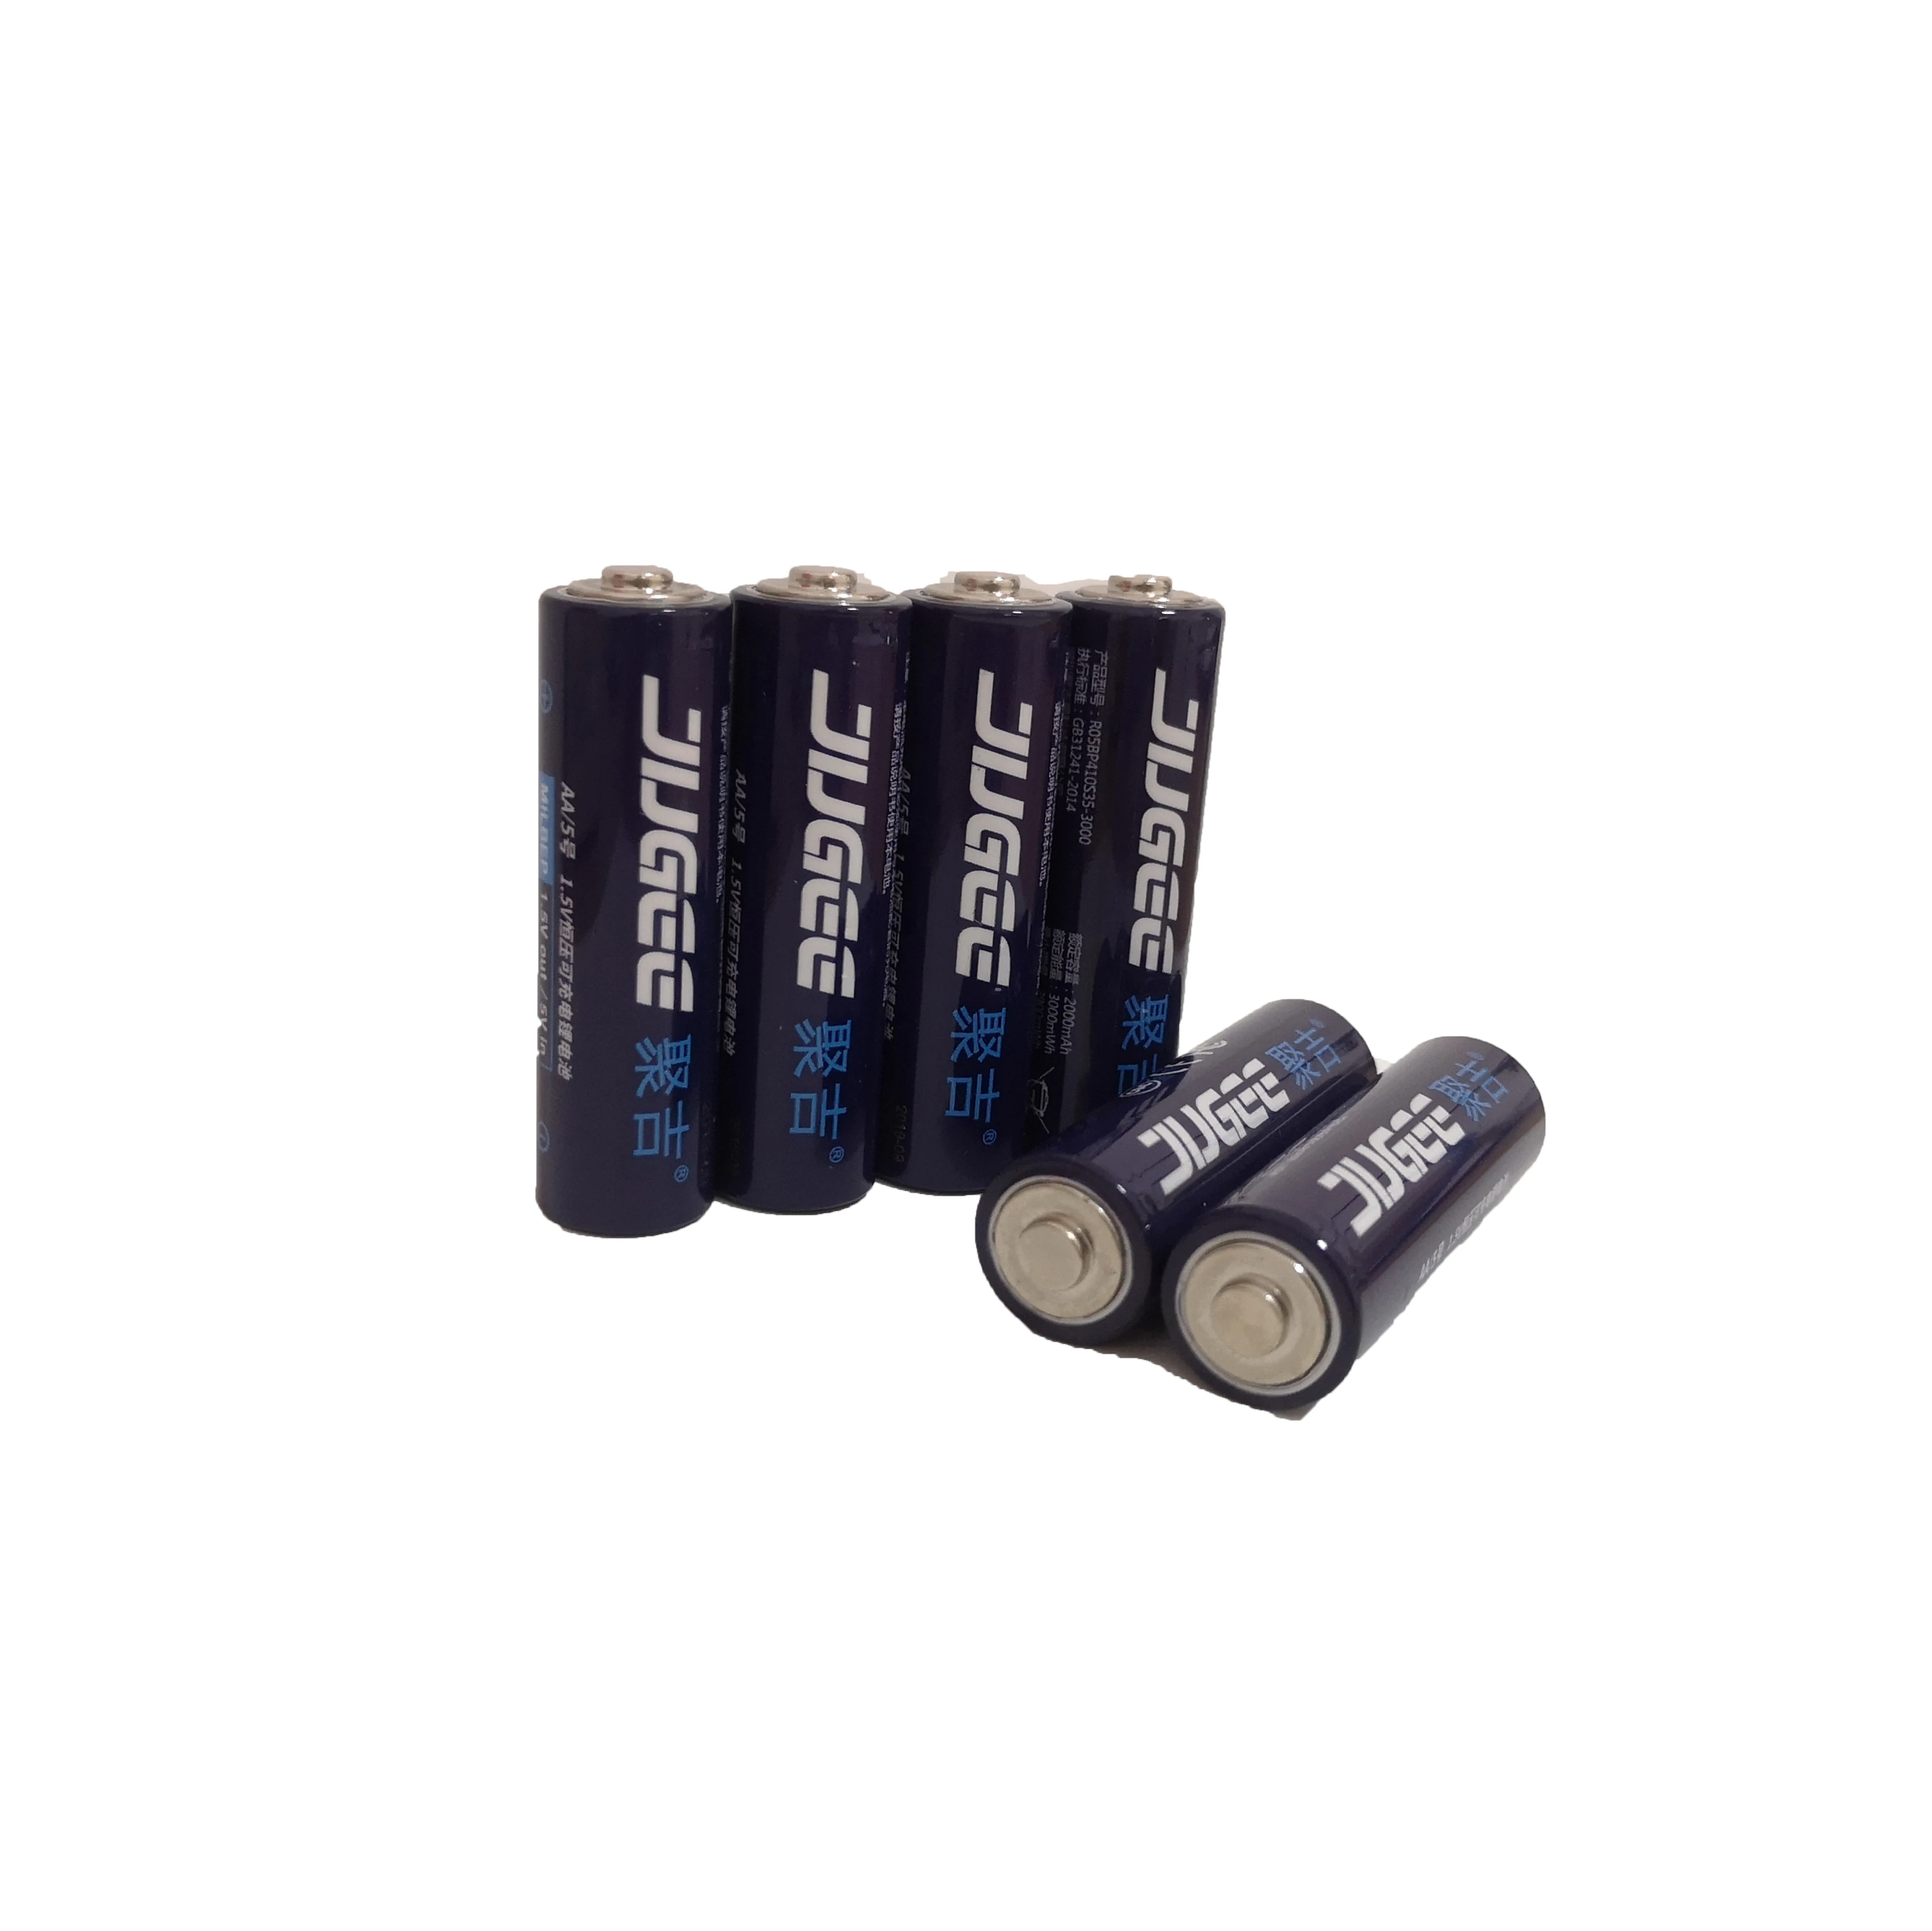 JUGEE Rechargeable Lithium ion AA Battery Supplier 1.5V 2 in 1 charger manufacturer